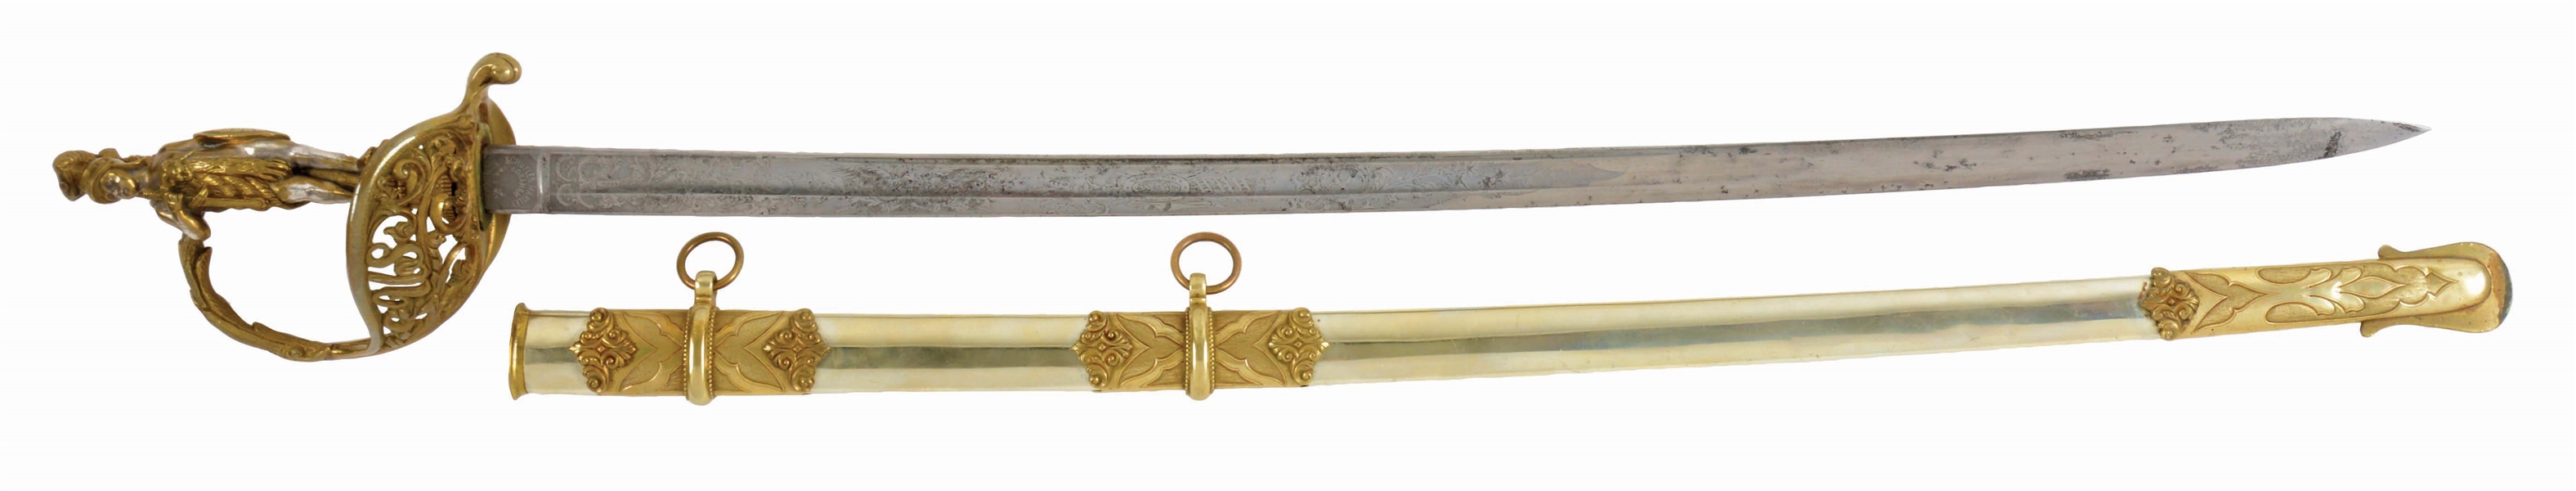 EXCELLENT STATUE HILTED MODEL 1850 OFFICERS PRESENTATION SWORD OF CAPTAIN J.T. WHITTIER.